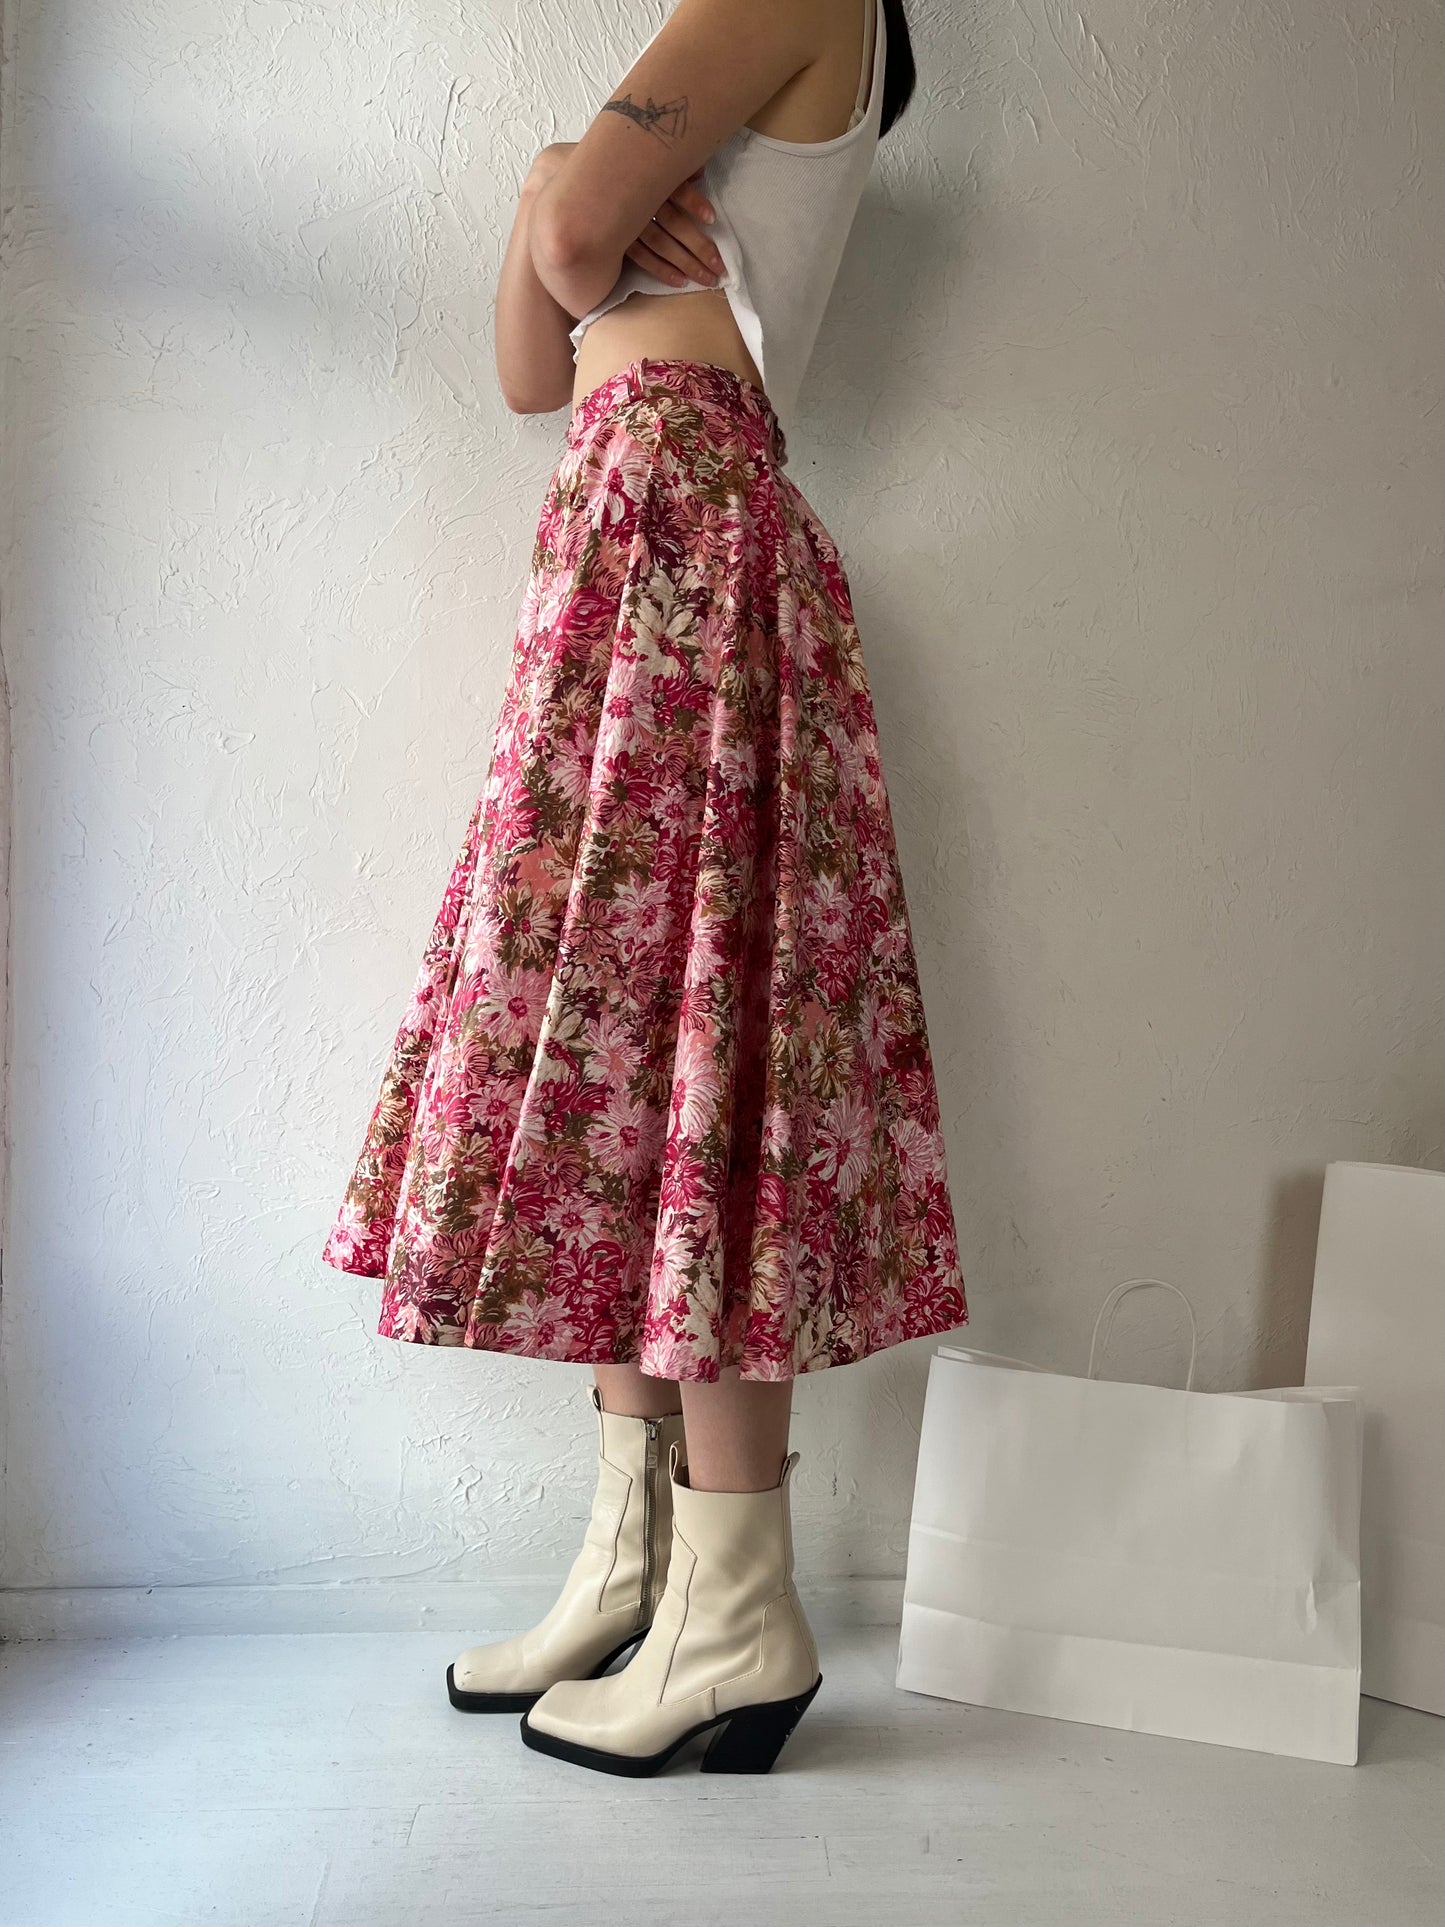 60s Handmade Pink Floral A Line Midi Skirt / Small